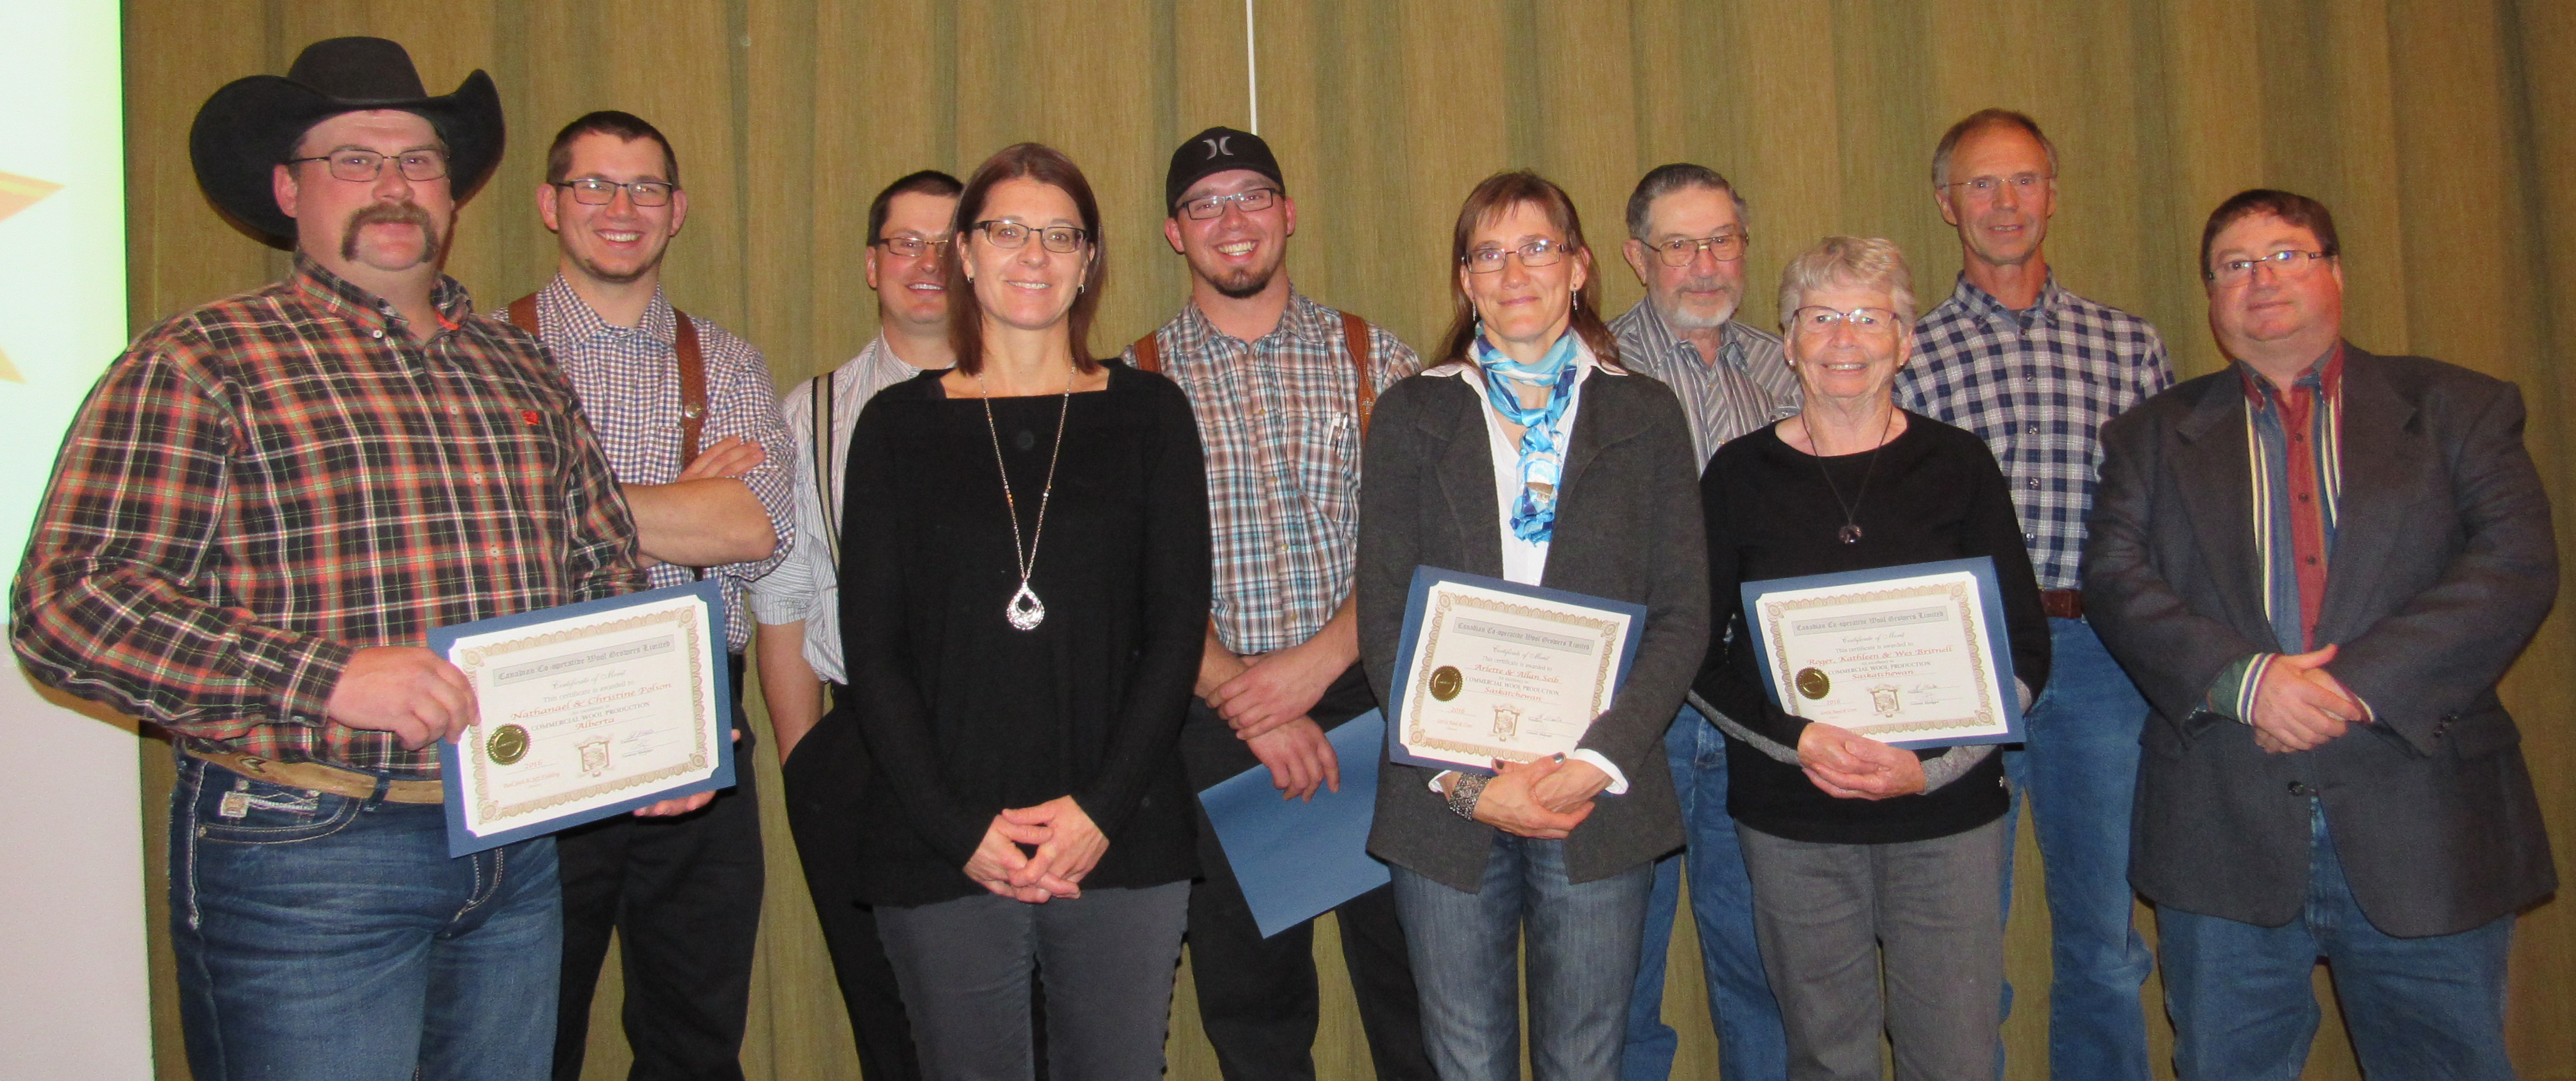 Certificate of Merit winners for 2016 that attended the AGM in 2017